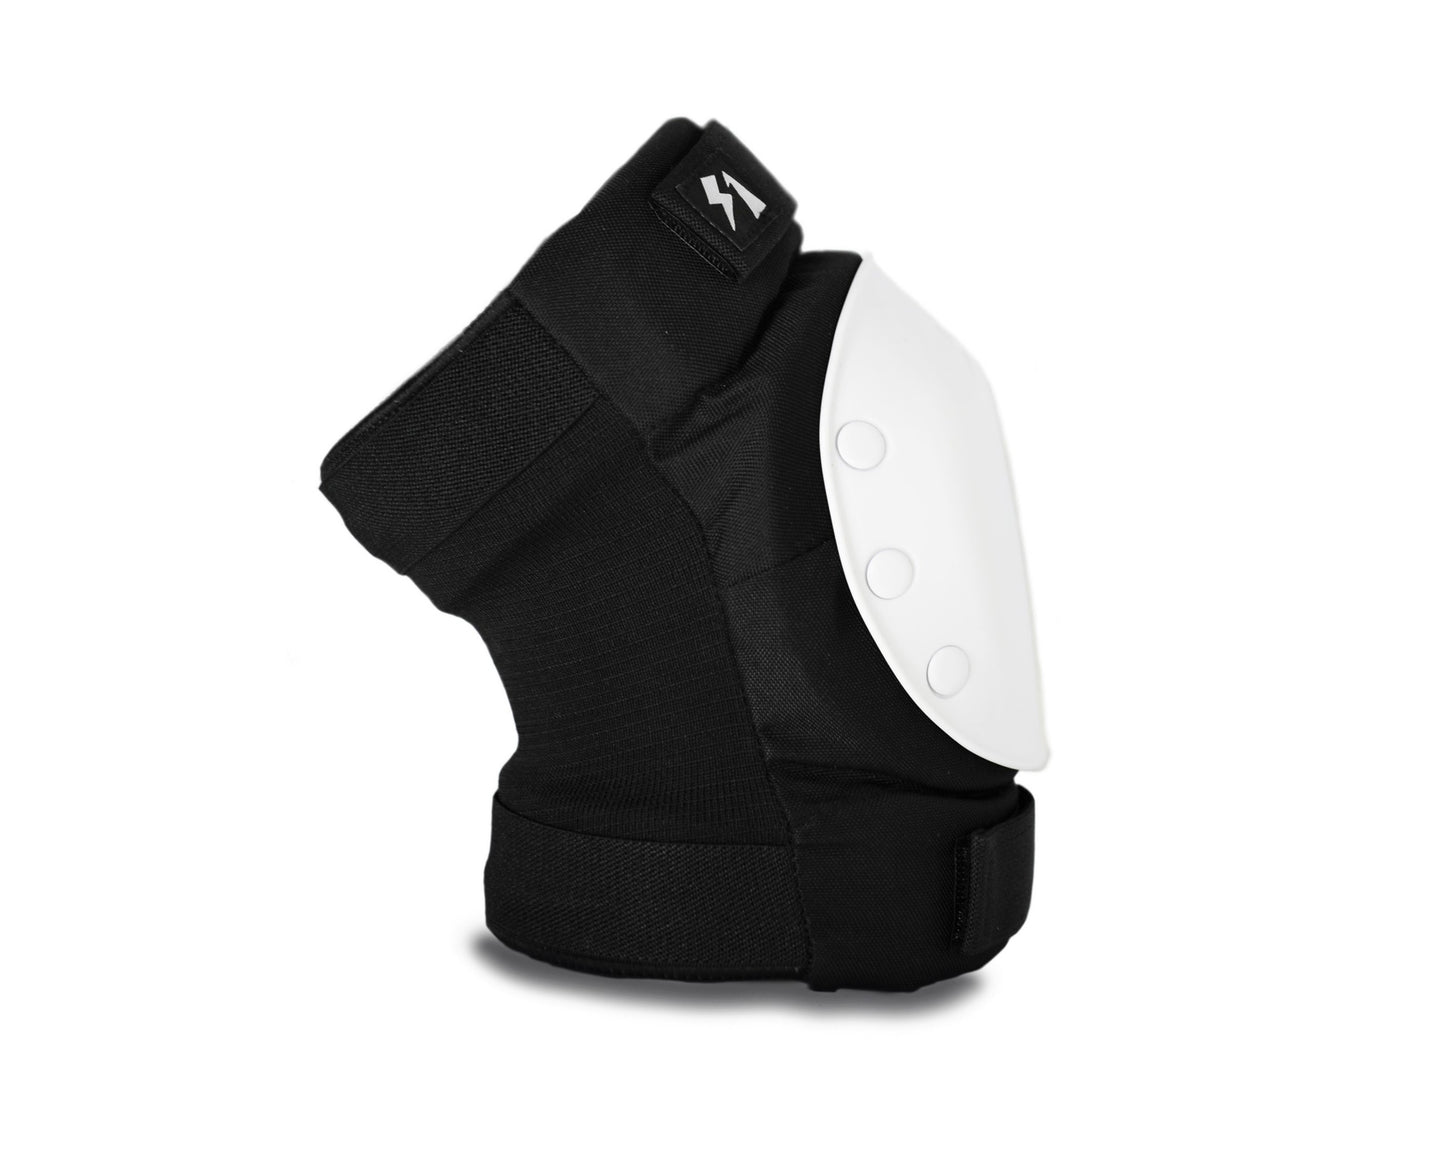 S1 Park Knee and Elbow Pad Sets - Black